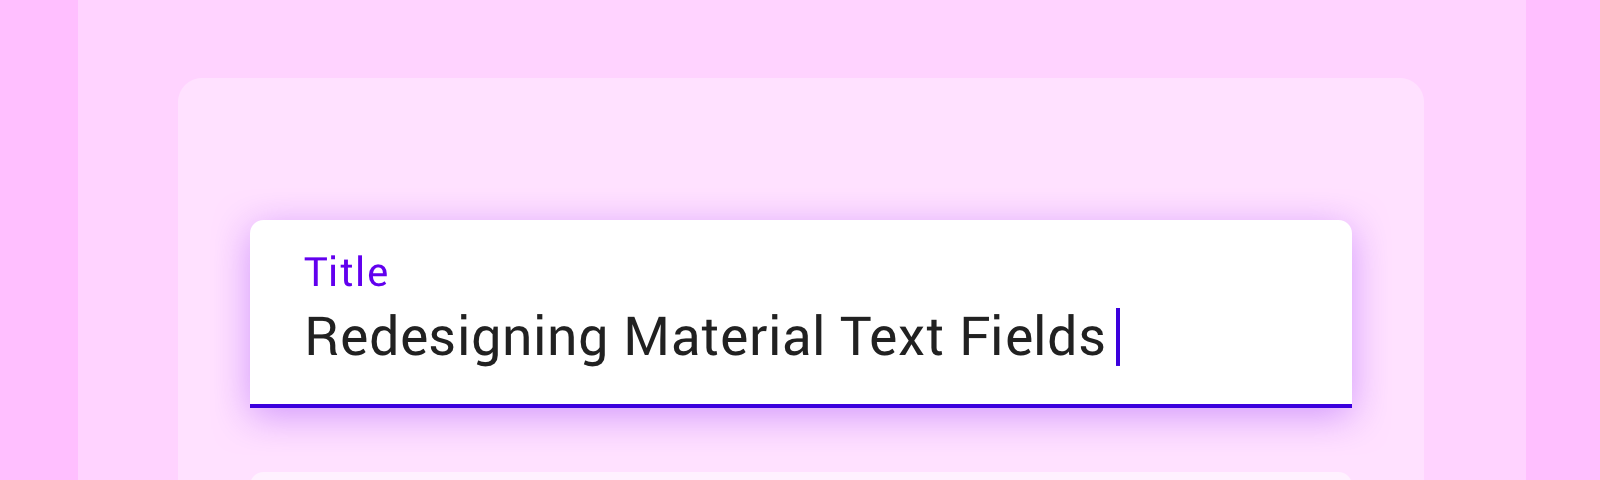 New Material Text Field